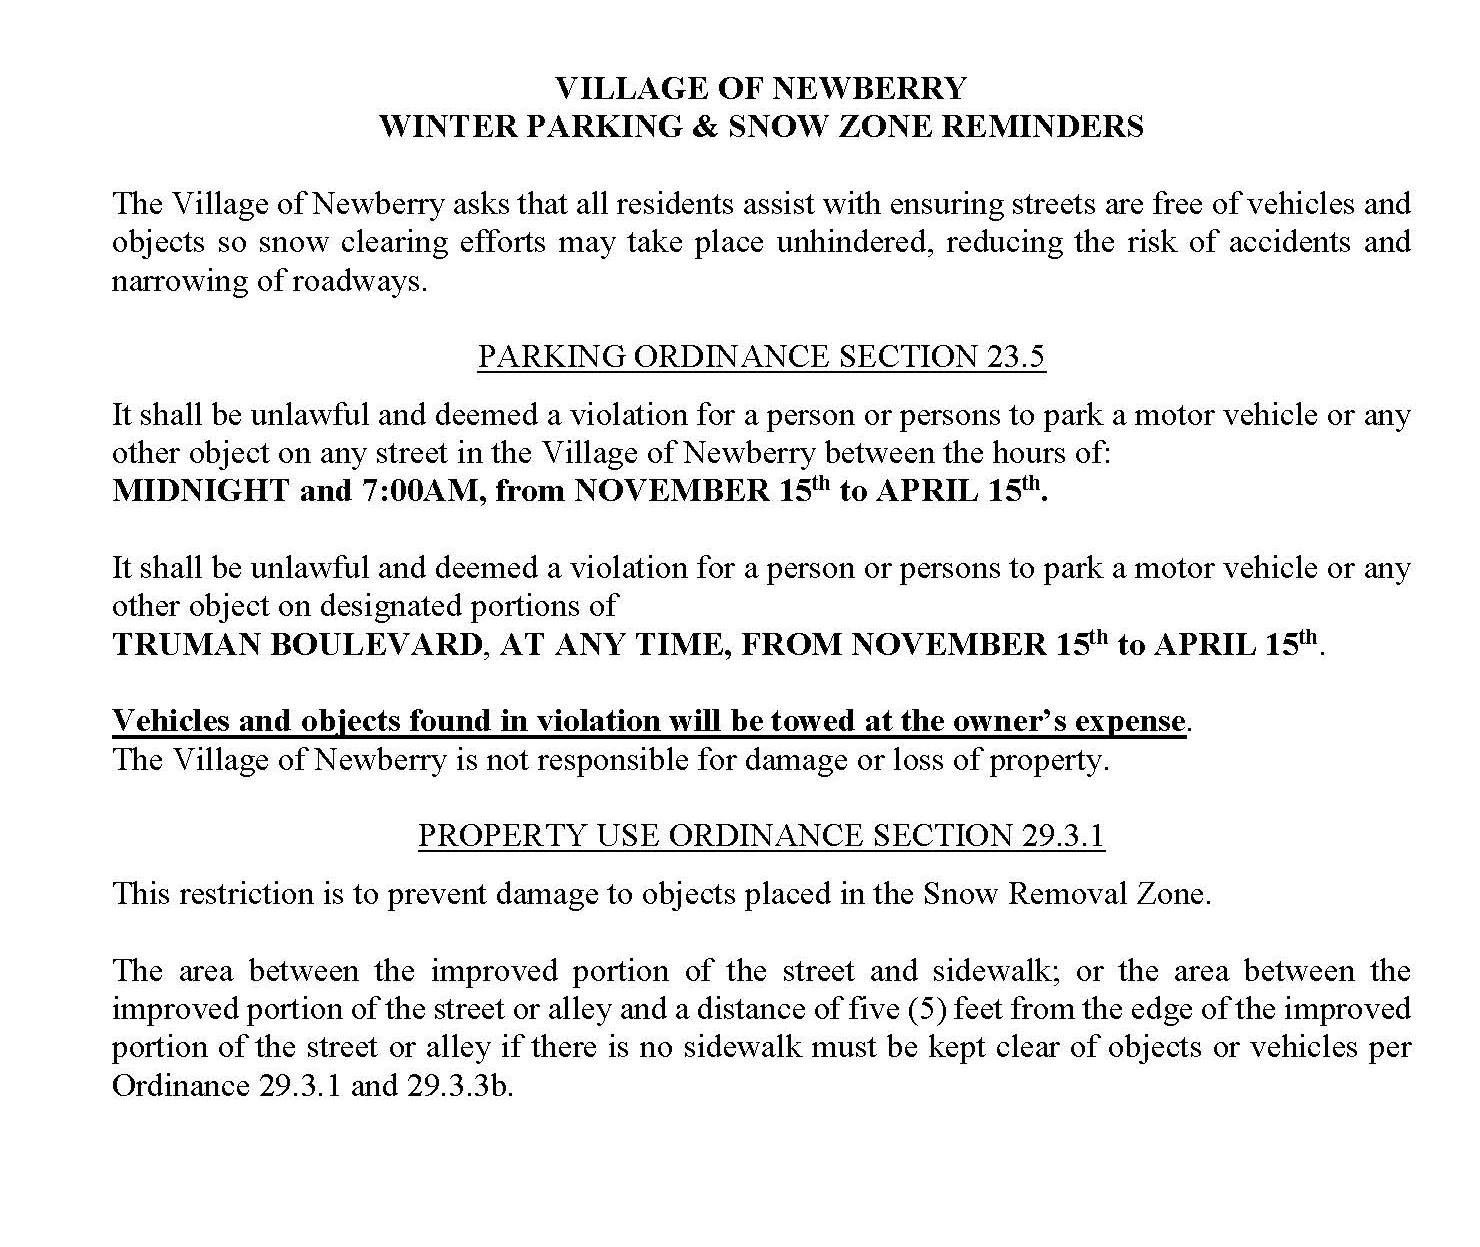 Winter parking and snow zone reminders for 2022 - Copy